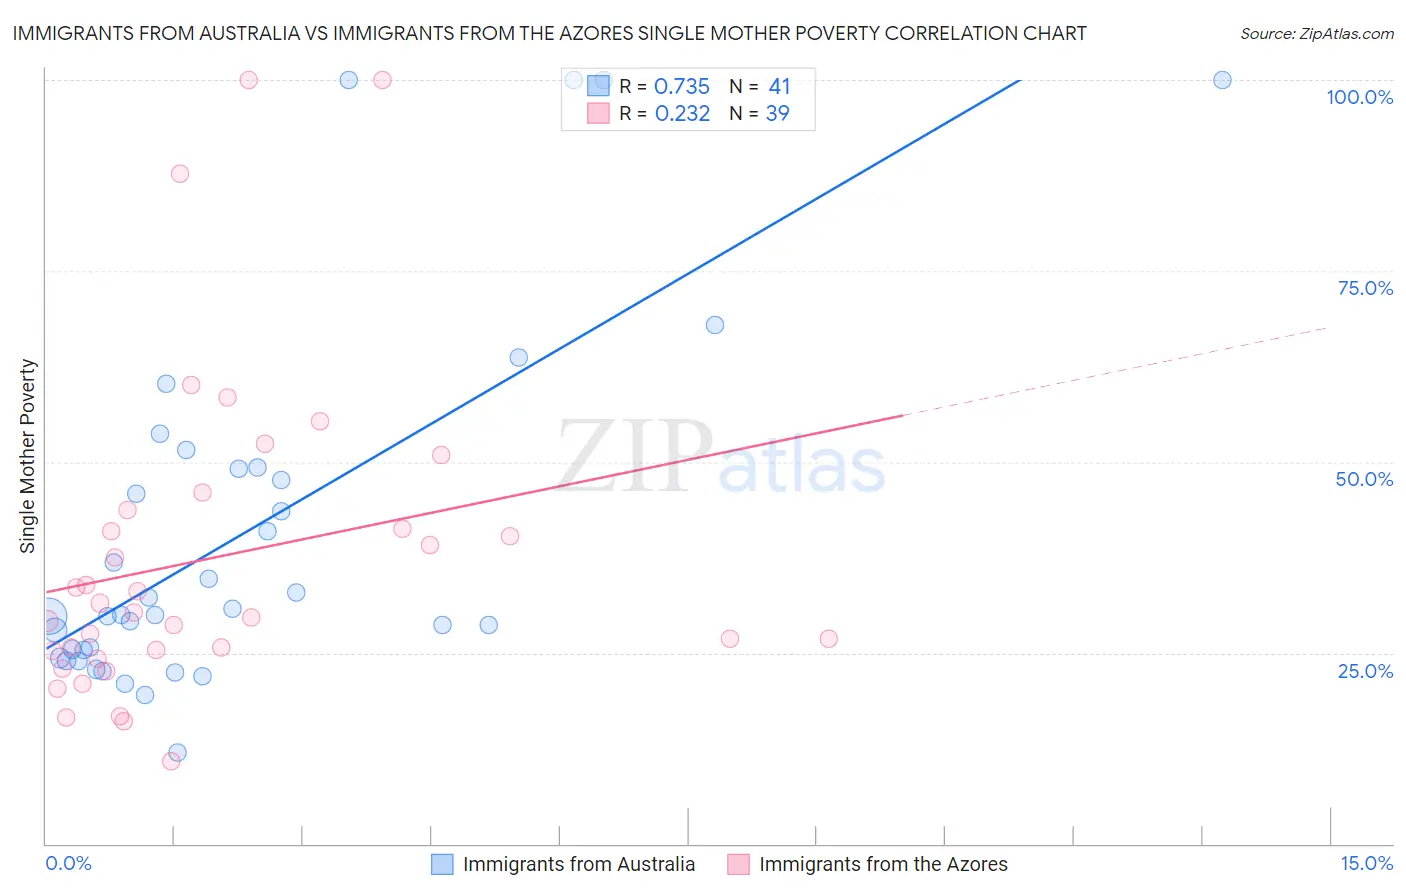 Immigrants from Australia vs Immigrants from the Azores Single Mother Poverty